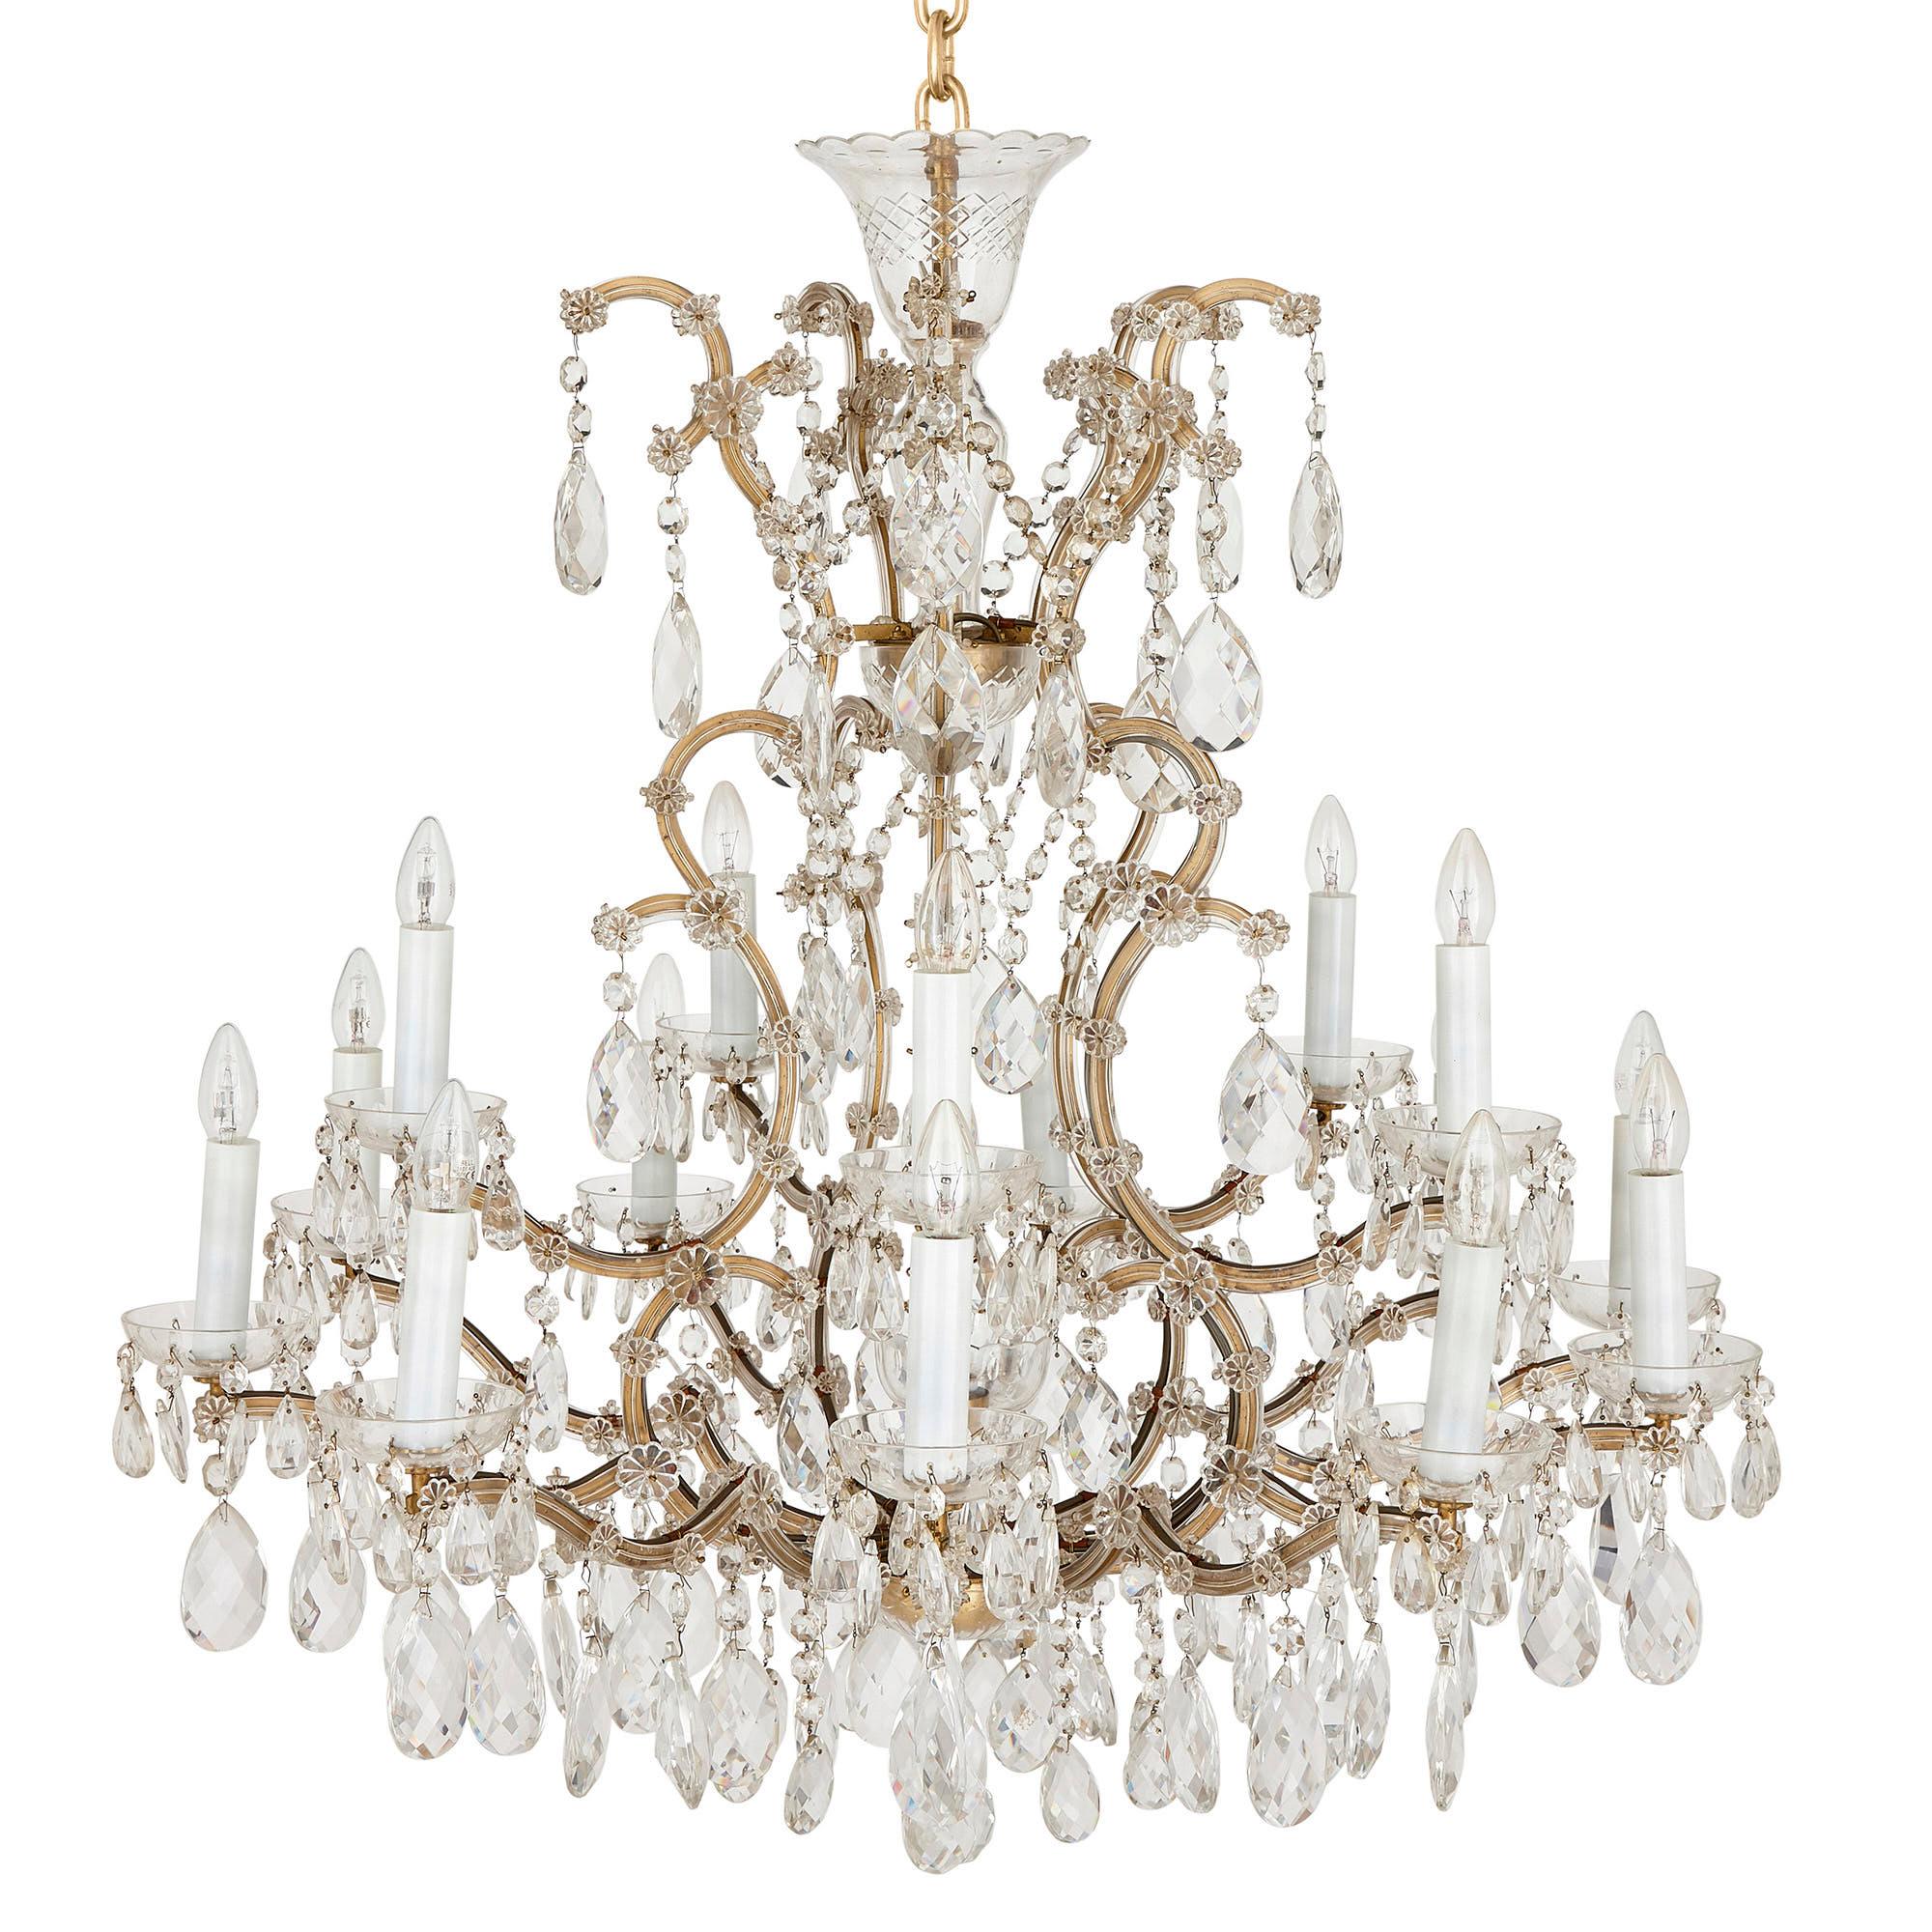 Pair of Bohemian faceted glass Rococo style chandeliers
Bohemian, 20th Century
Measures: Height 109cm, diameter 101cm

This pair of luxurious chandeliers is crafted in the Bohemian manner from wonderfully faceted cut glass. Each chandelier